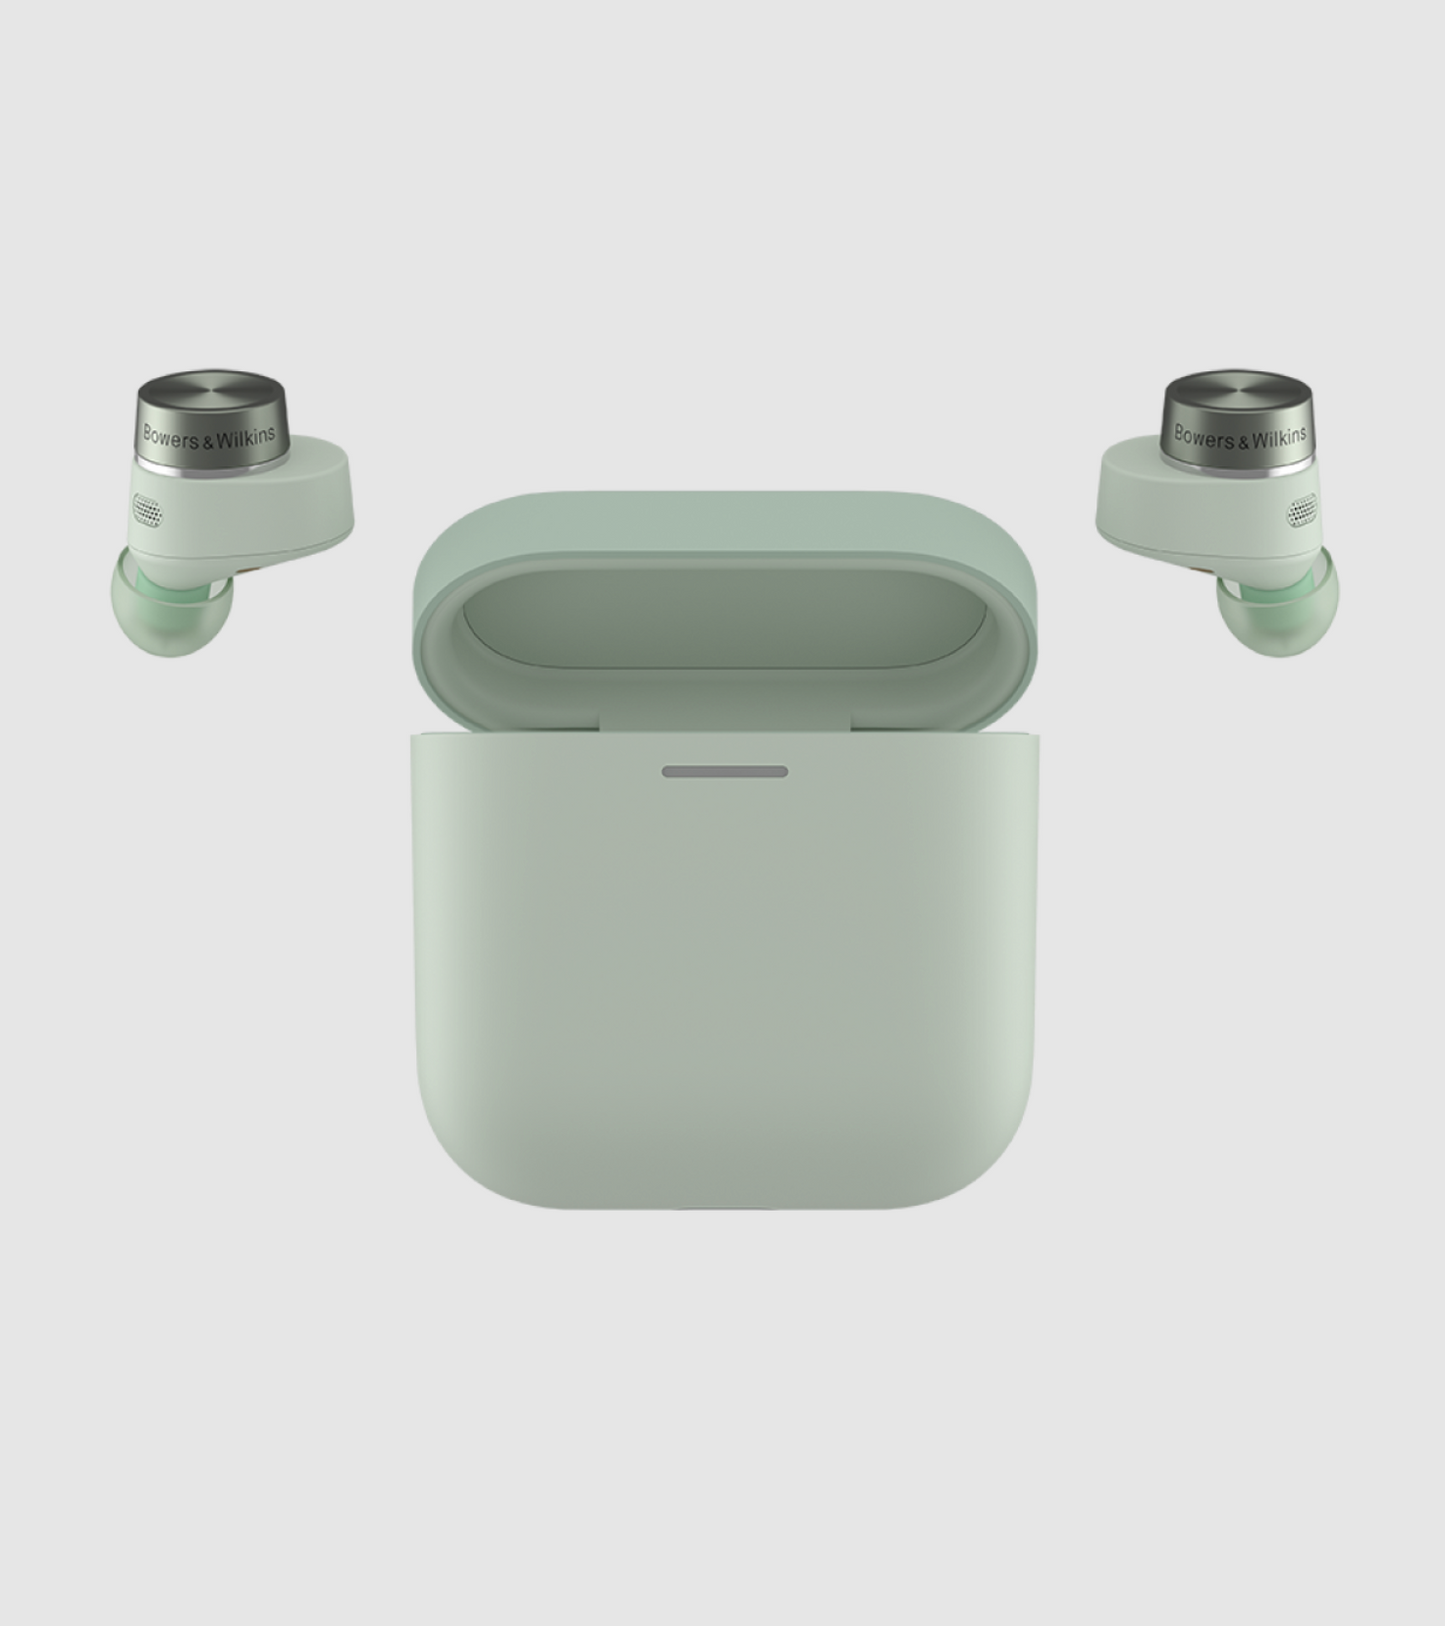 B&W Pi5 S2 Wireless Earbuds in Sage Green. Image with case